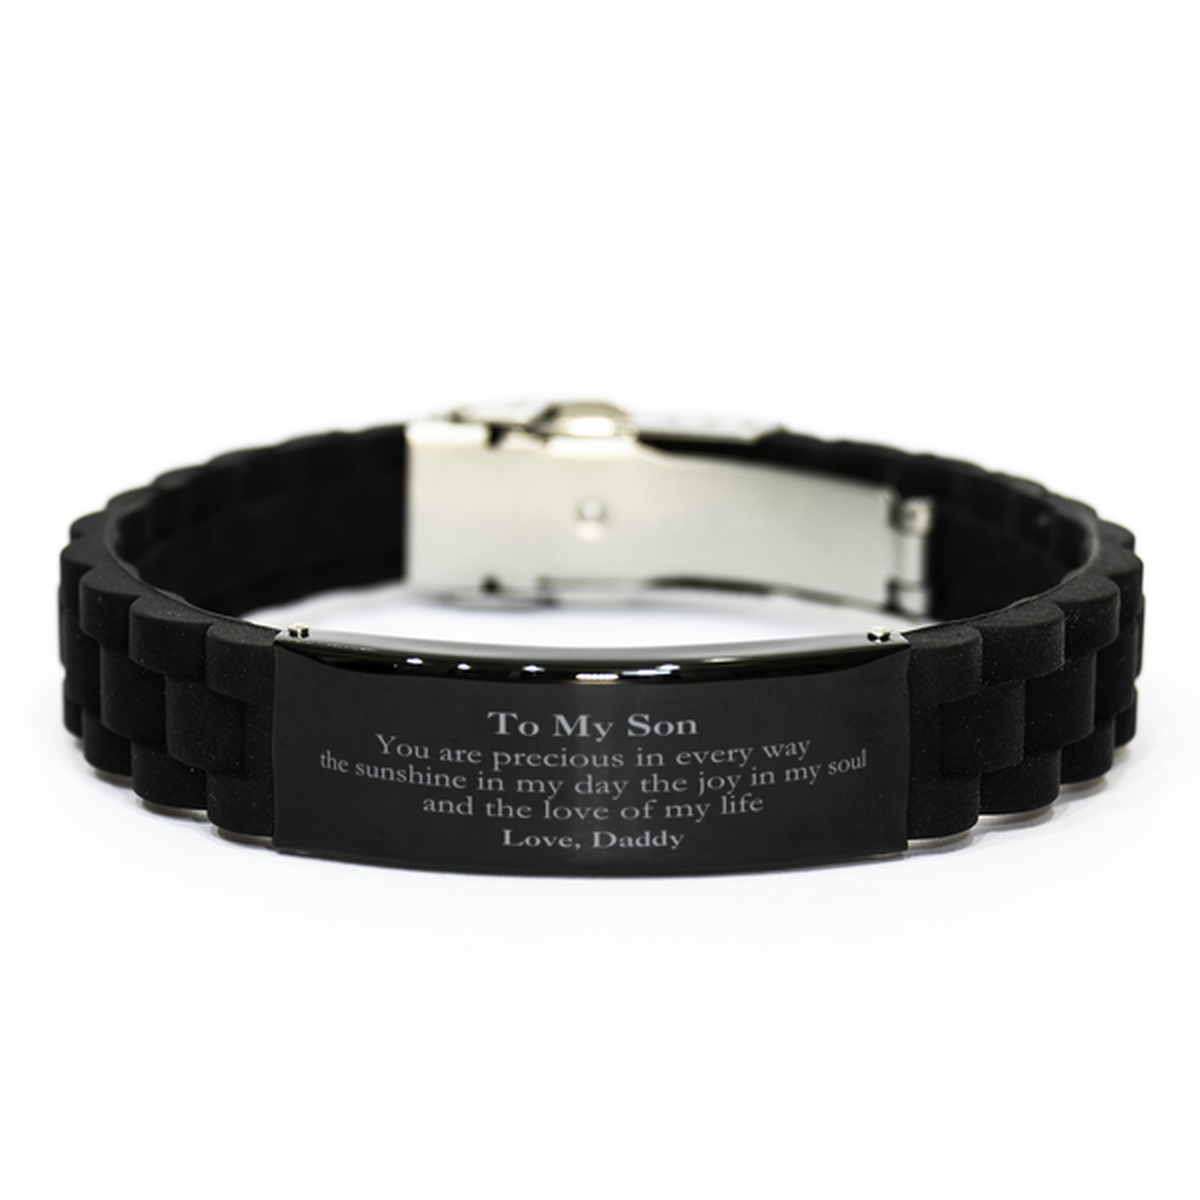 Graduation Gifts for Son Black Glidelock Clasp Bracelet Present from Daddy, Christmas Son Birthday Gifts Son You are precious in every way the sunshine in my day. Love, Daddy